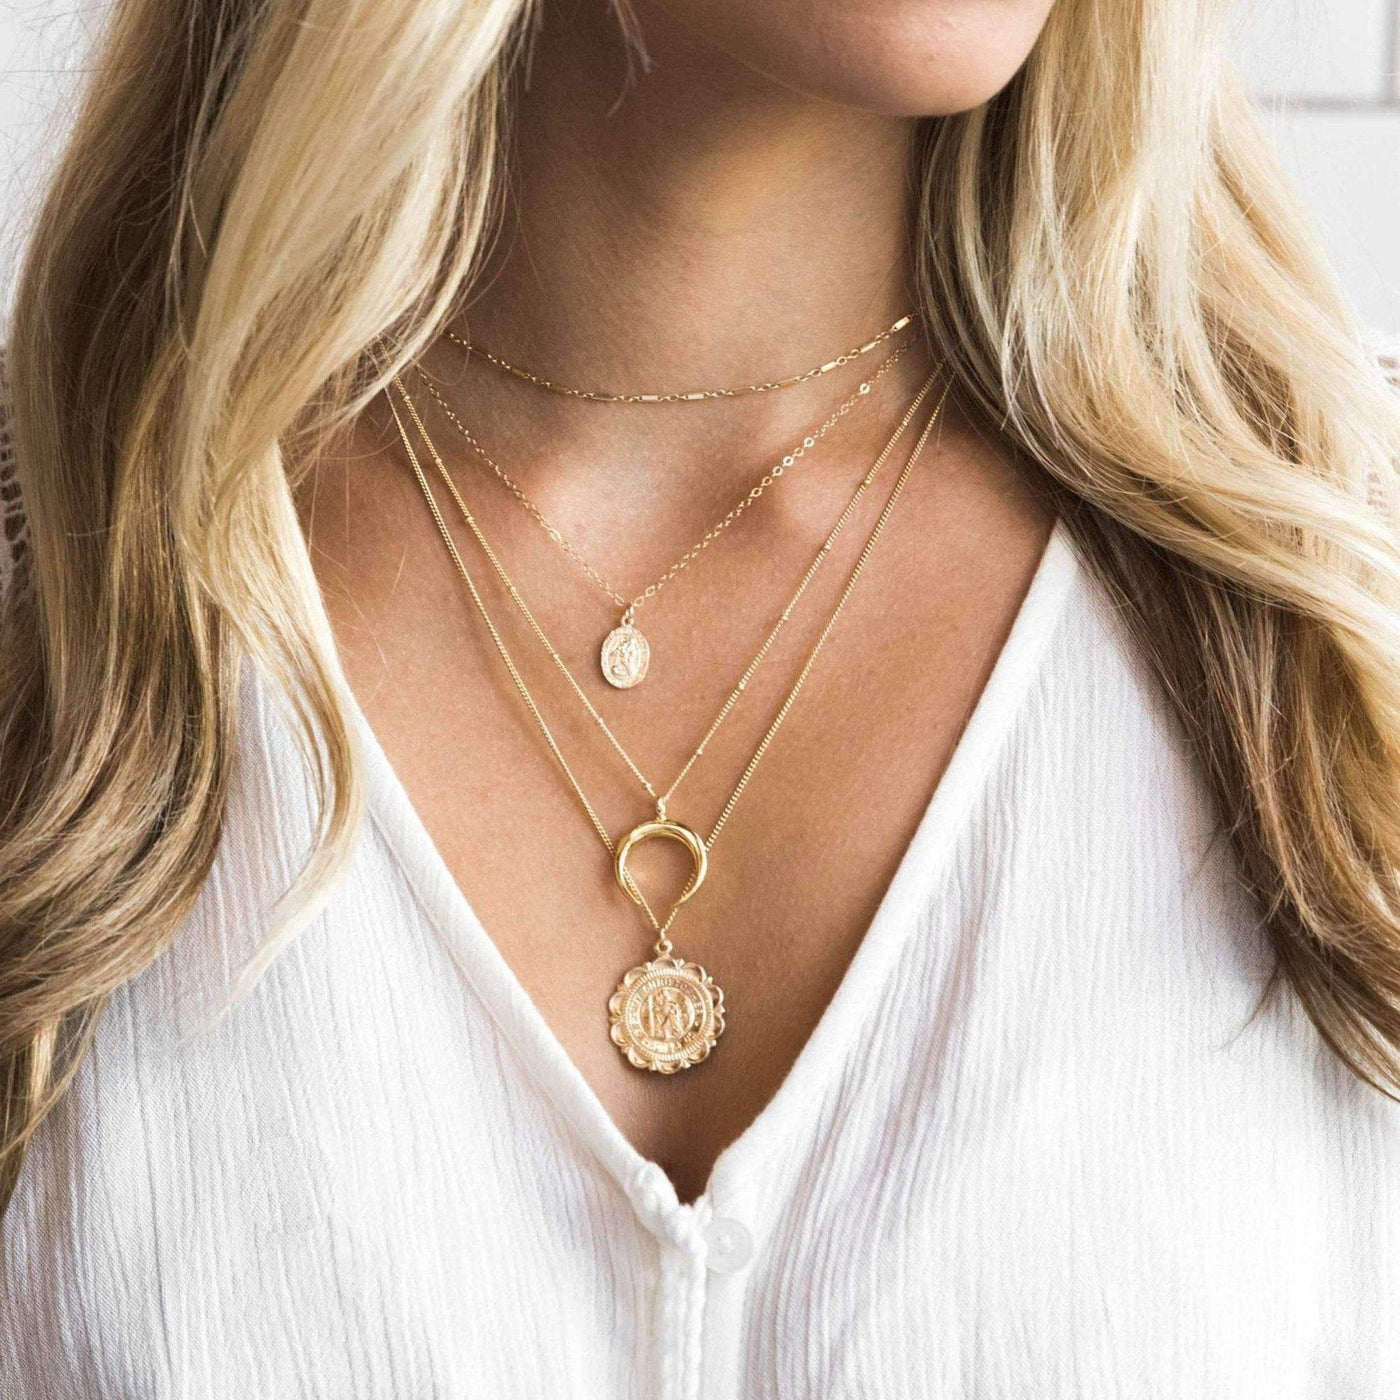 Traveler's Coin Necklace | Simple & Dainty